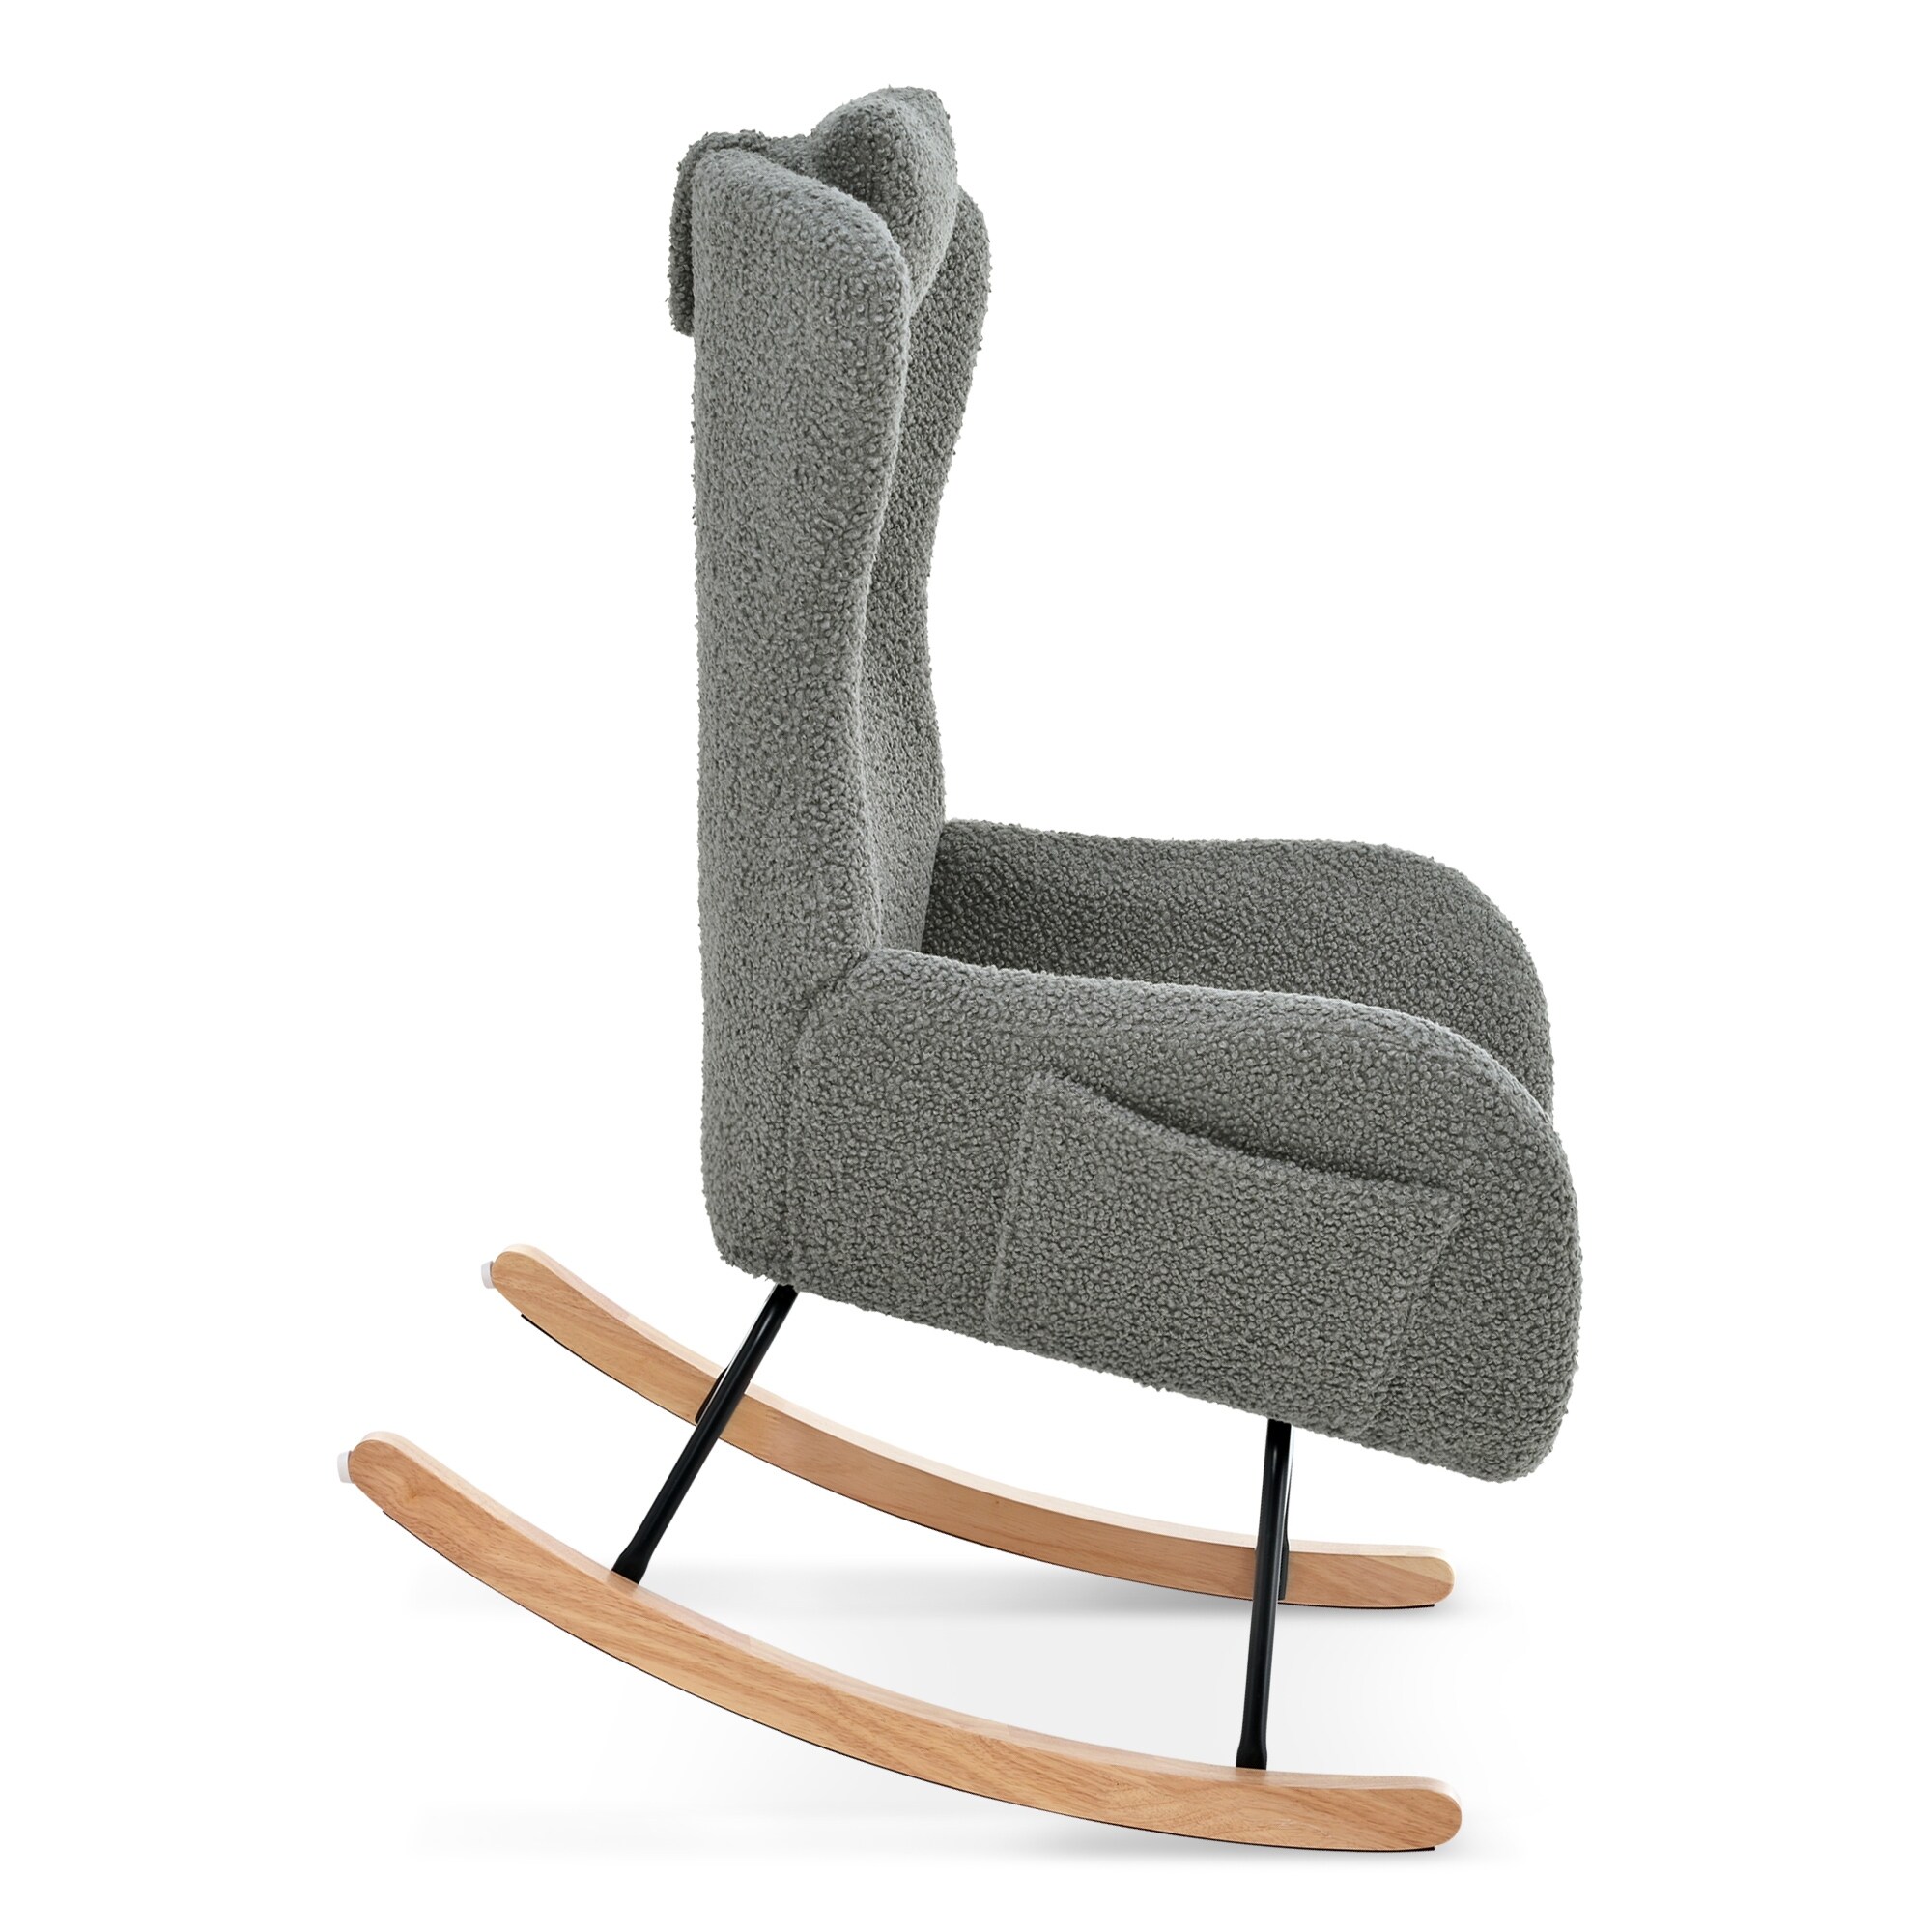 Fabric Rocking Chair with Anti-skid Pad Rubber Leg for Living Room and Bedroom, High Backrest Living Room Chairs with Cushion